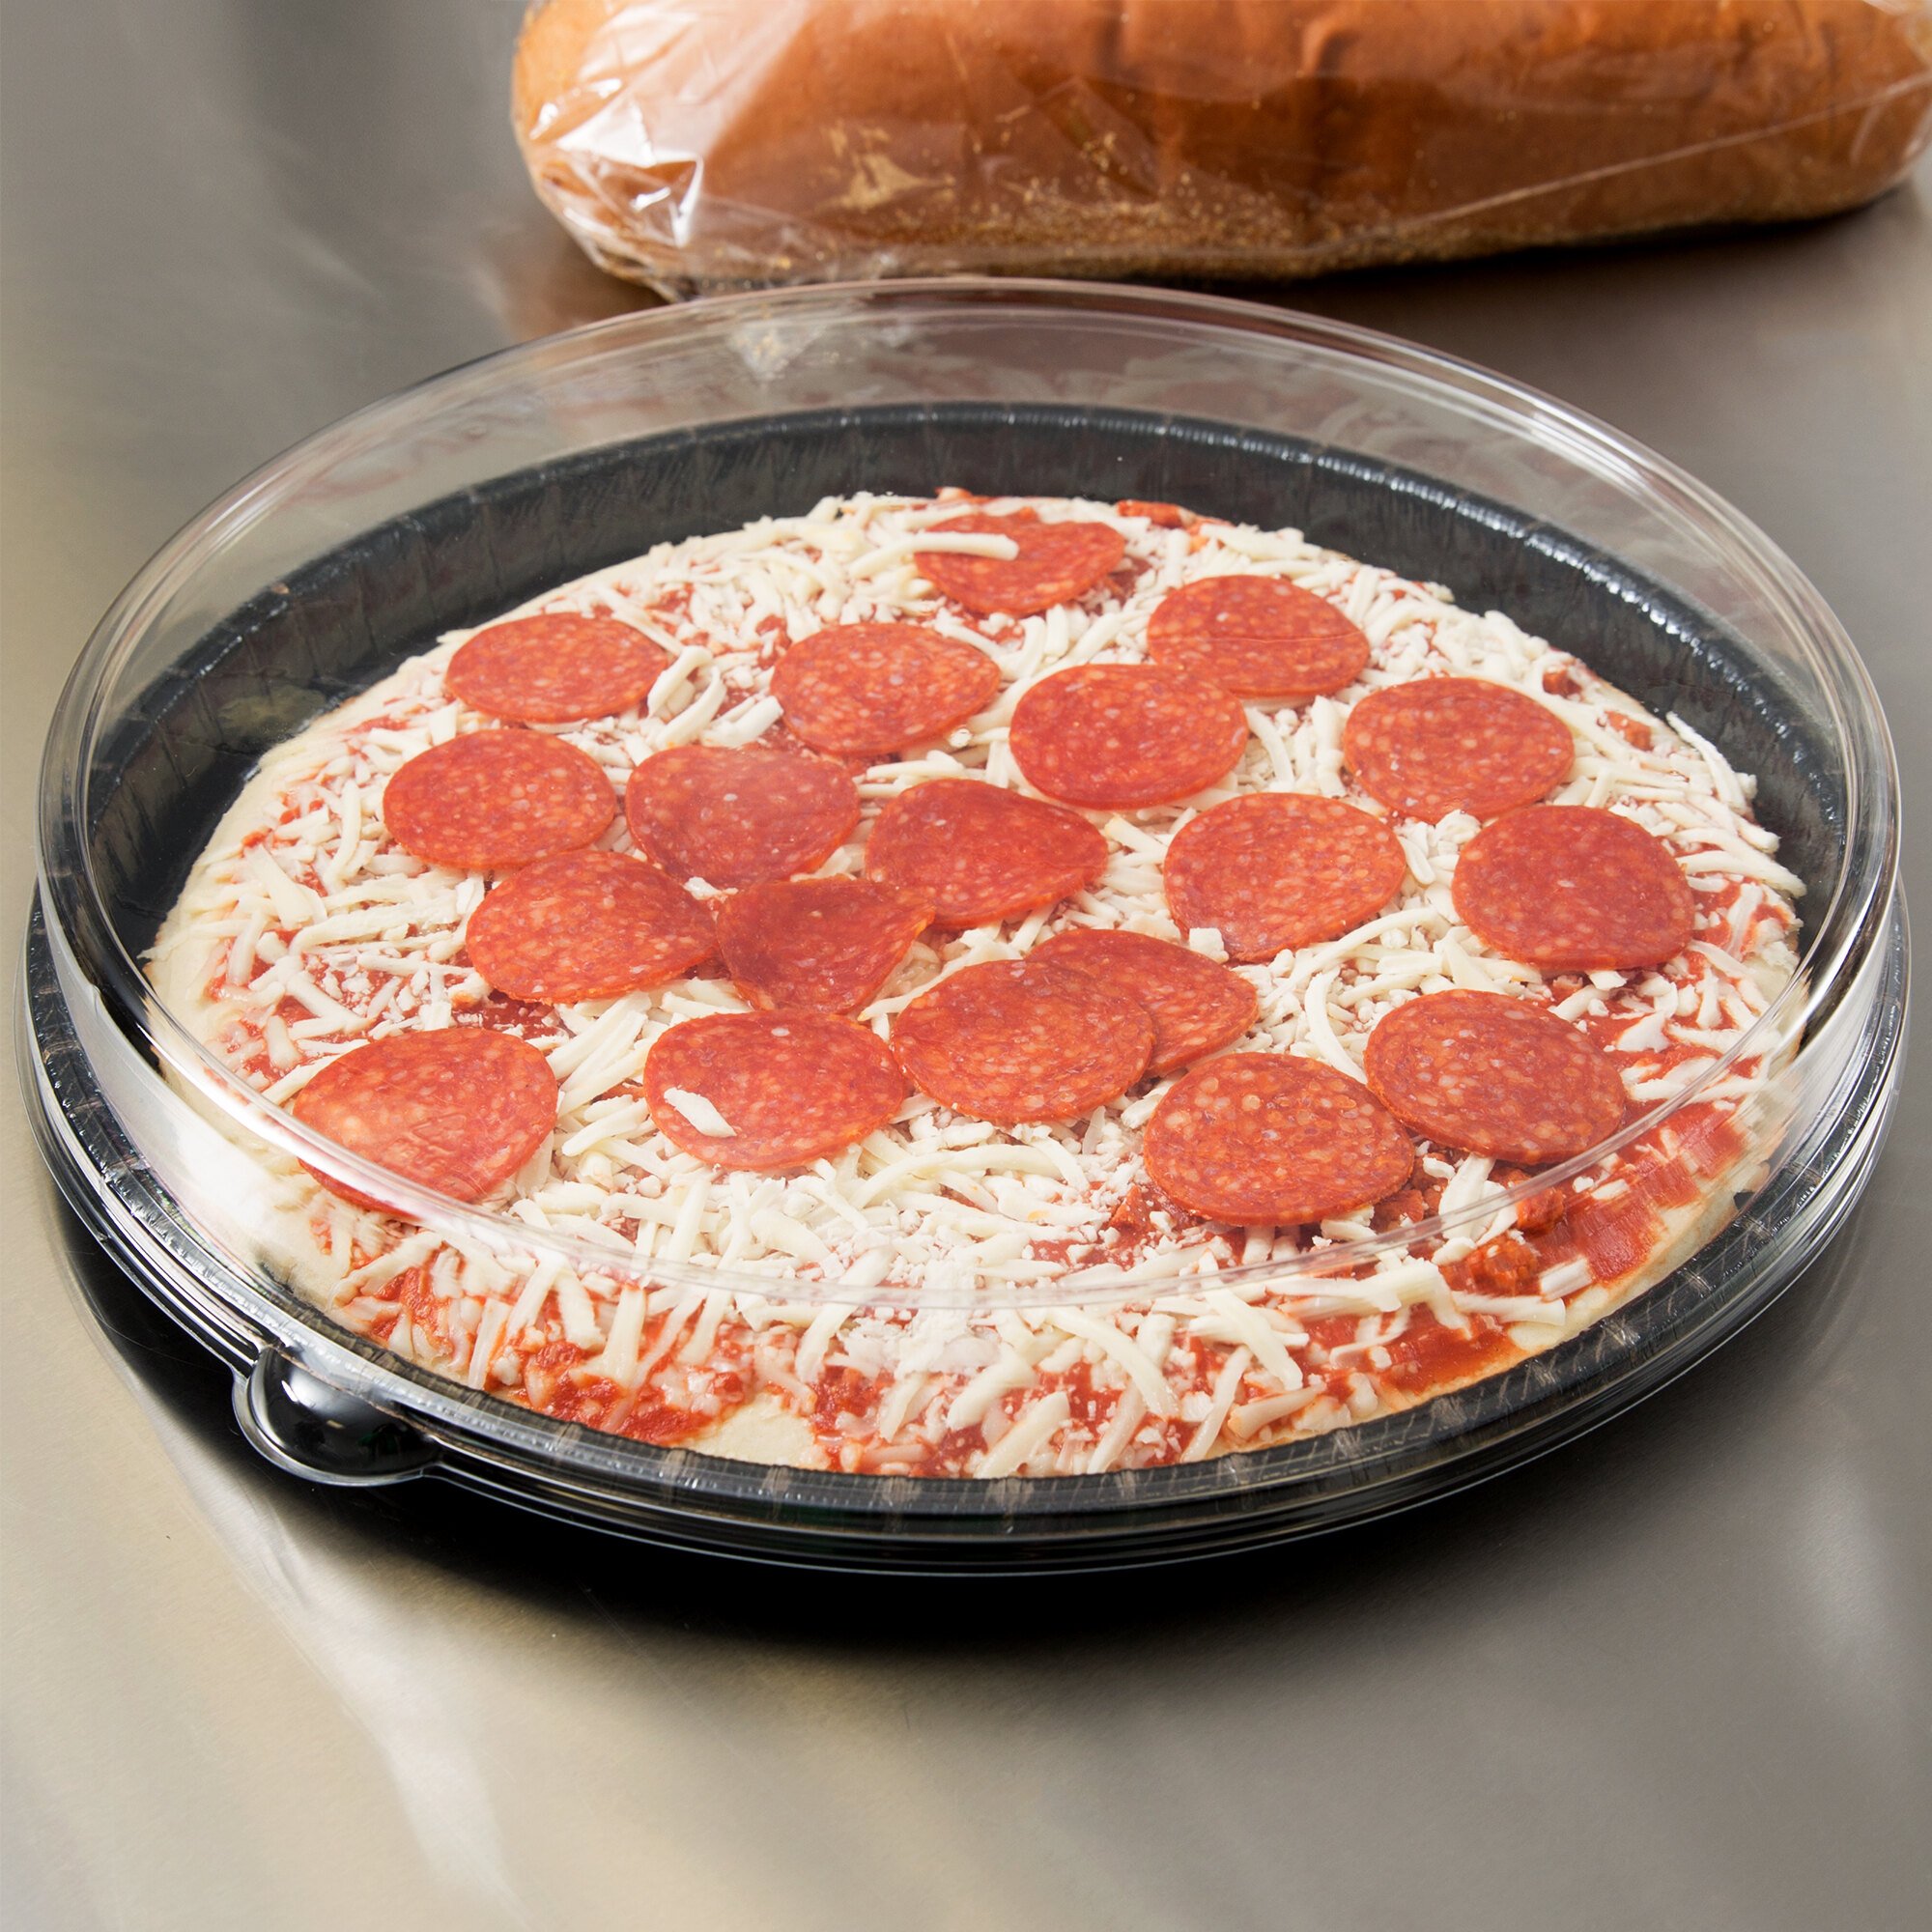 Black plastic tray with lid containing an unbaked pizza